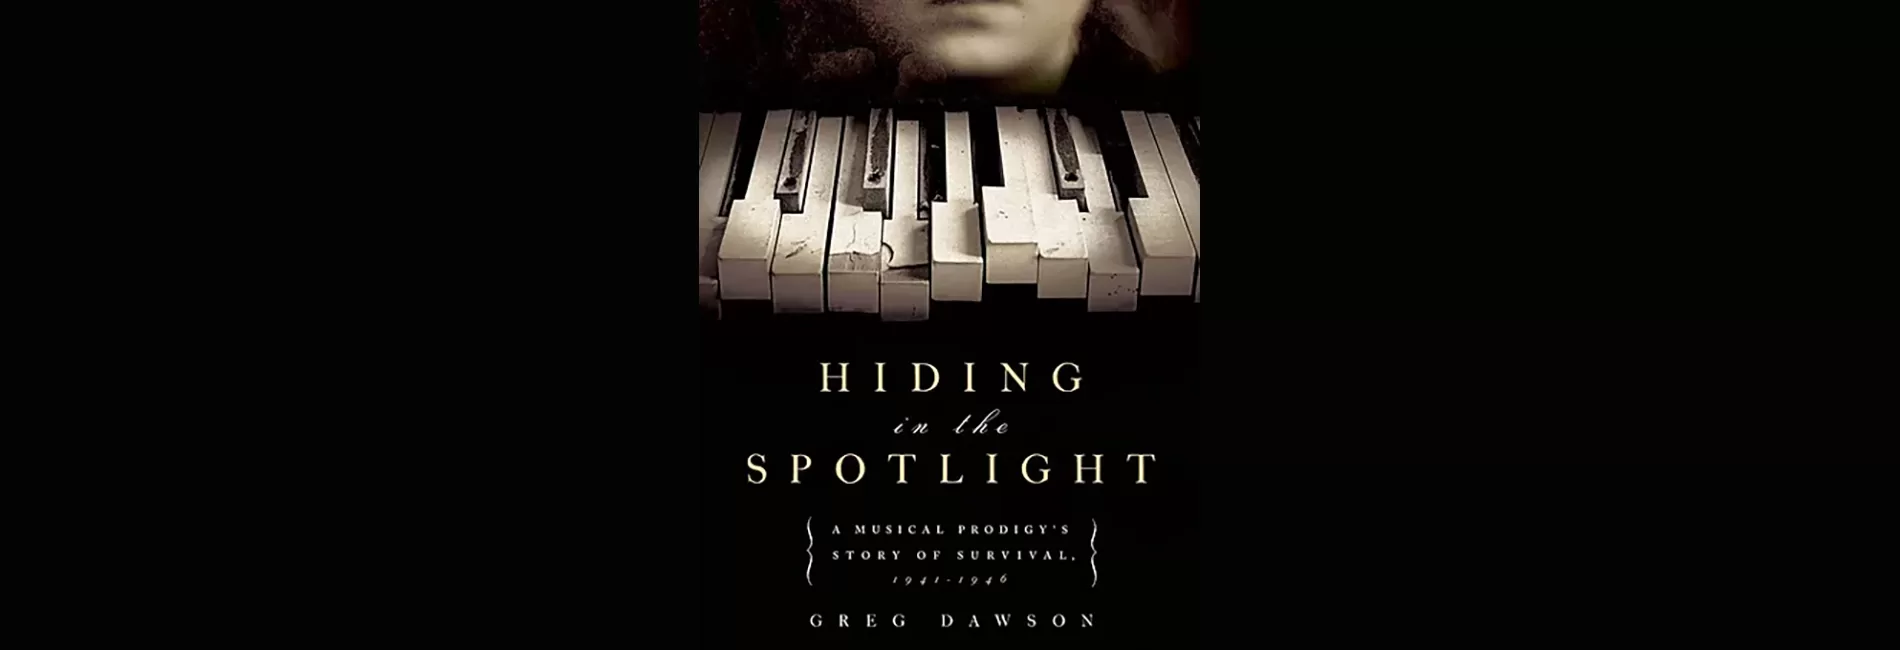 THE ODYSSEY OF A PIANO PRODIGY FROM HOLOCAUST TO MUSIC MOUNTAIN